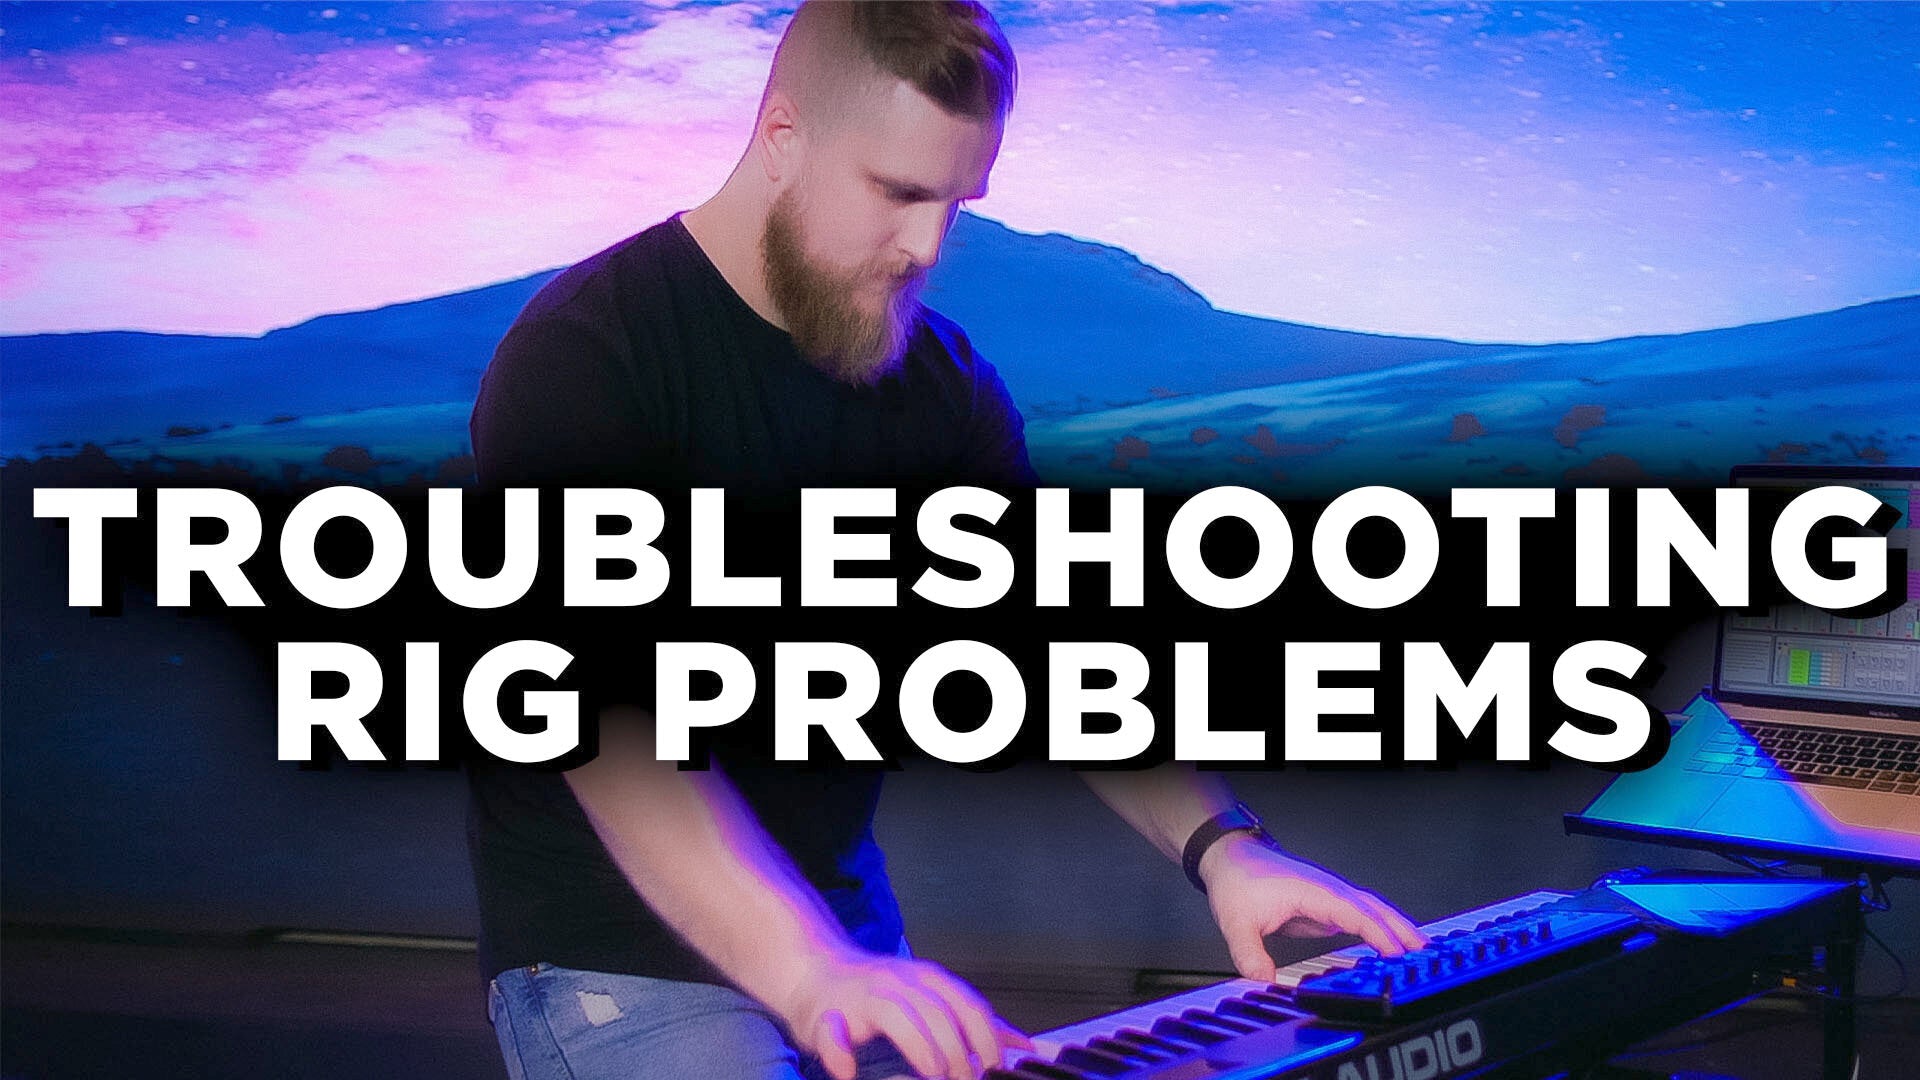 Troubleshoot Rig Problems Fast w/ These Tutorials